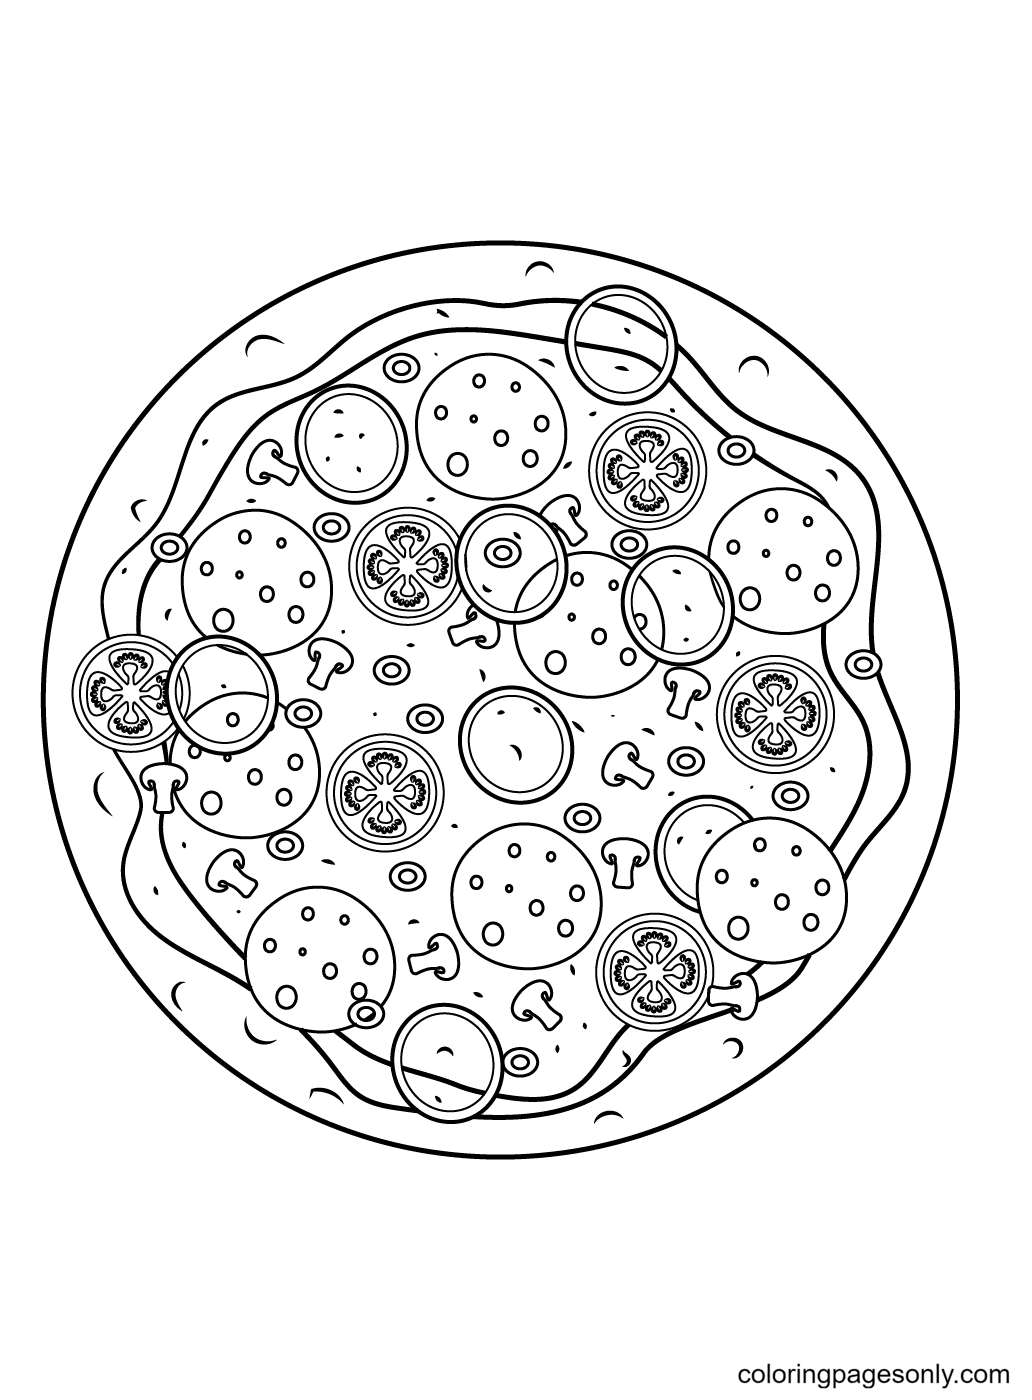 Pizza with pepperonis, onions, tomatoes, mushrooms, and olives Coloring Page